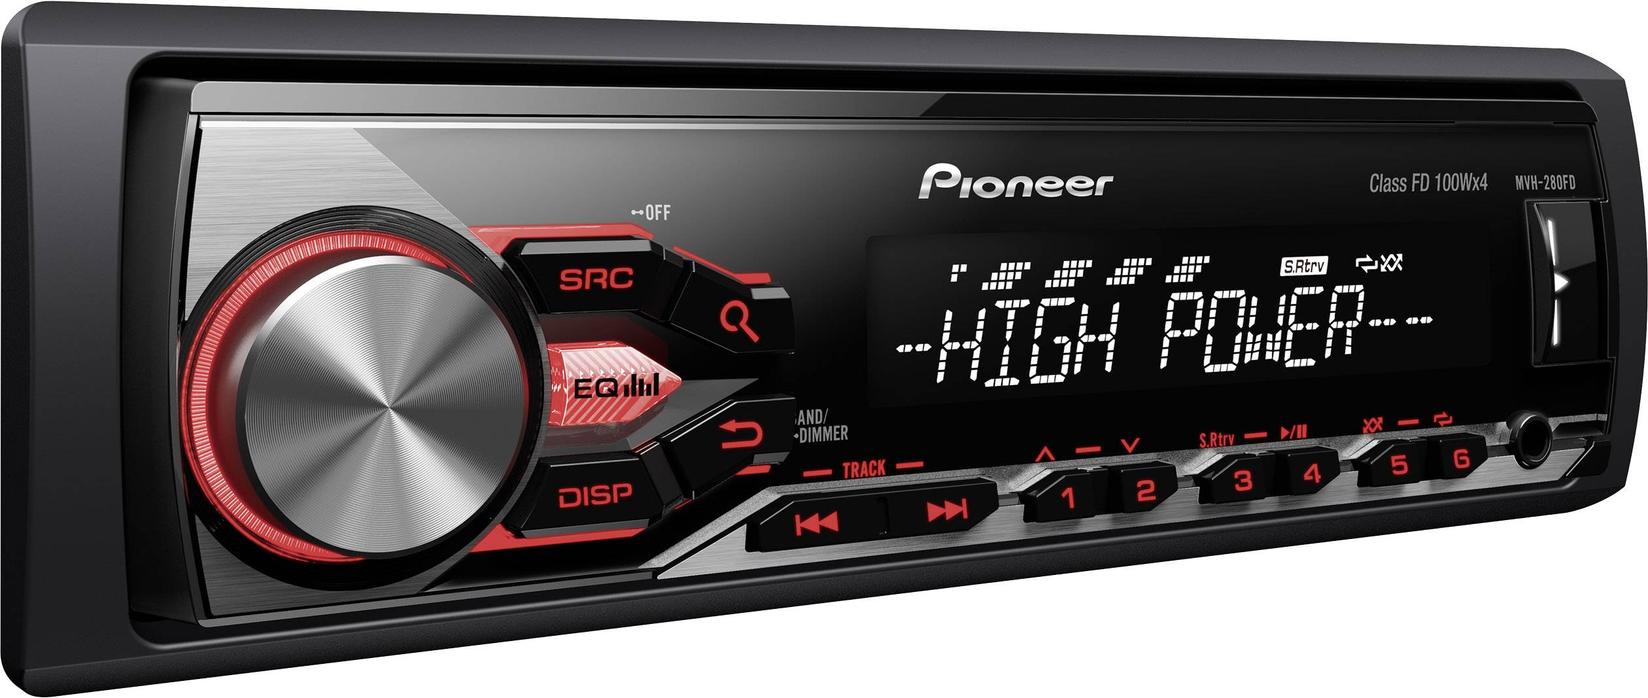 Selected image for PIONEER Auto radio MVH-280FD 4x100W